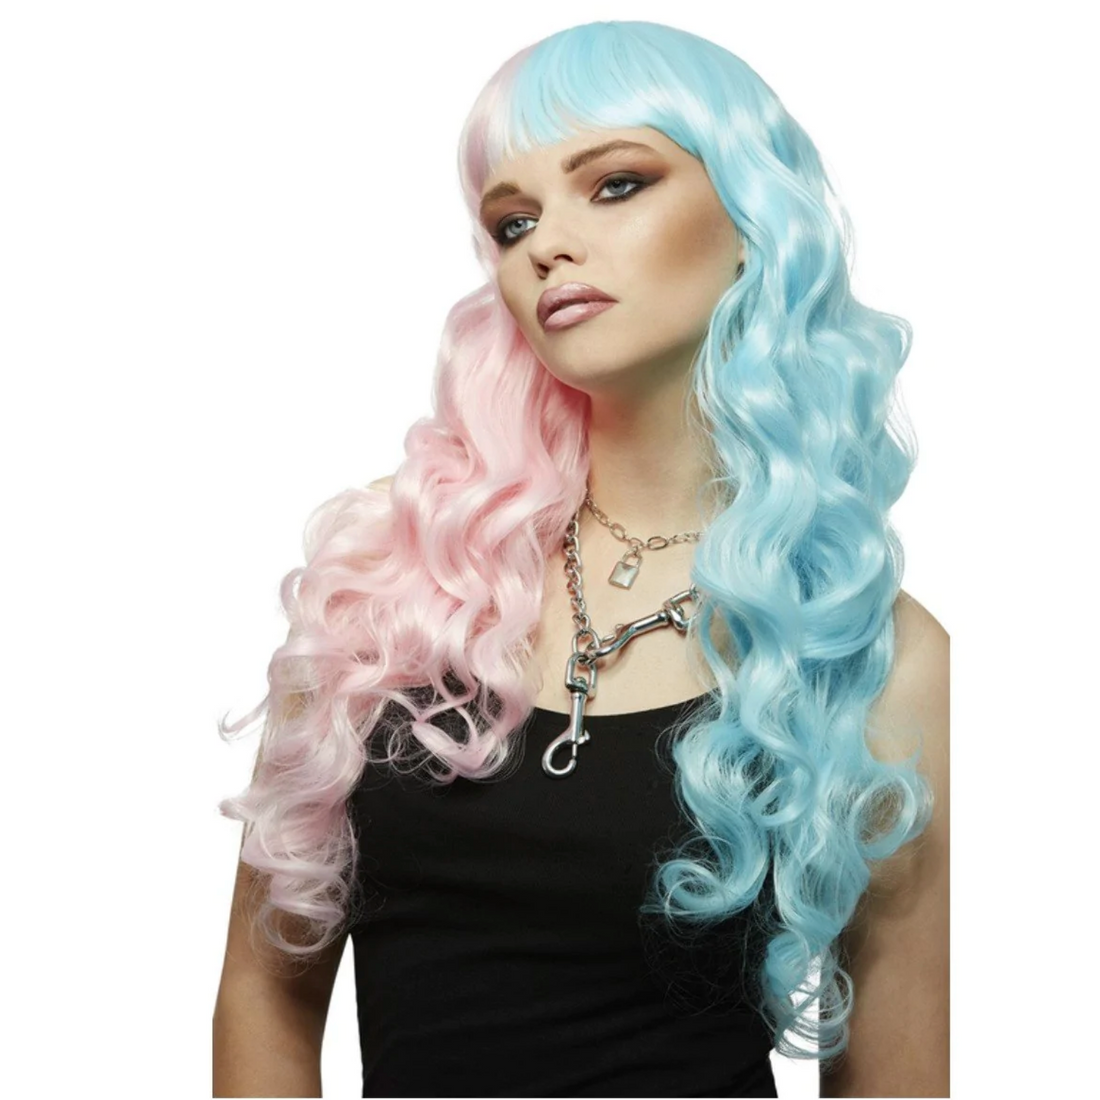 Manic Panic Siren Wig - Cotton Candy Angel, side view